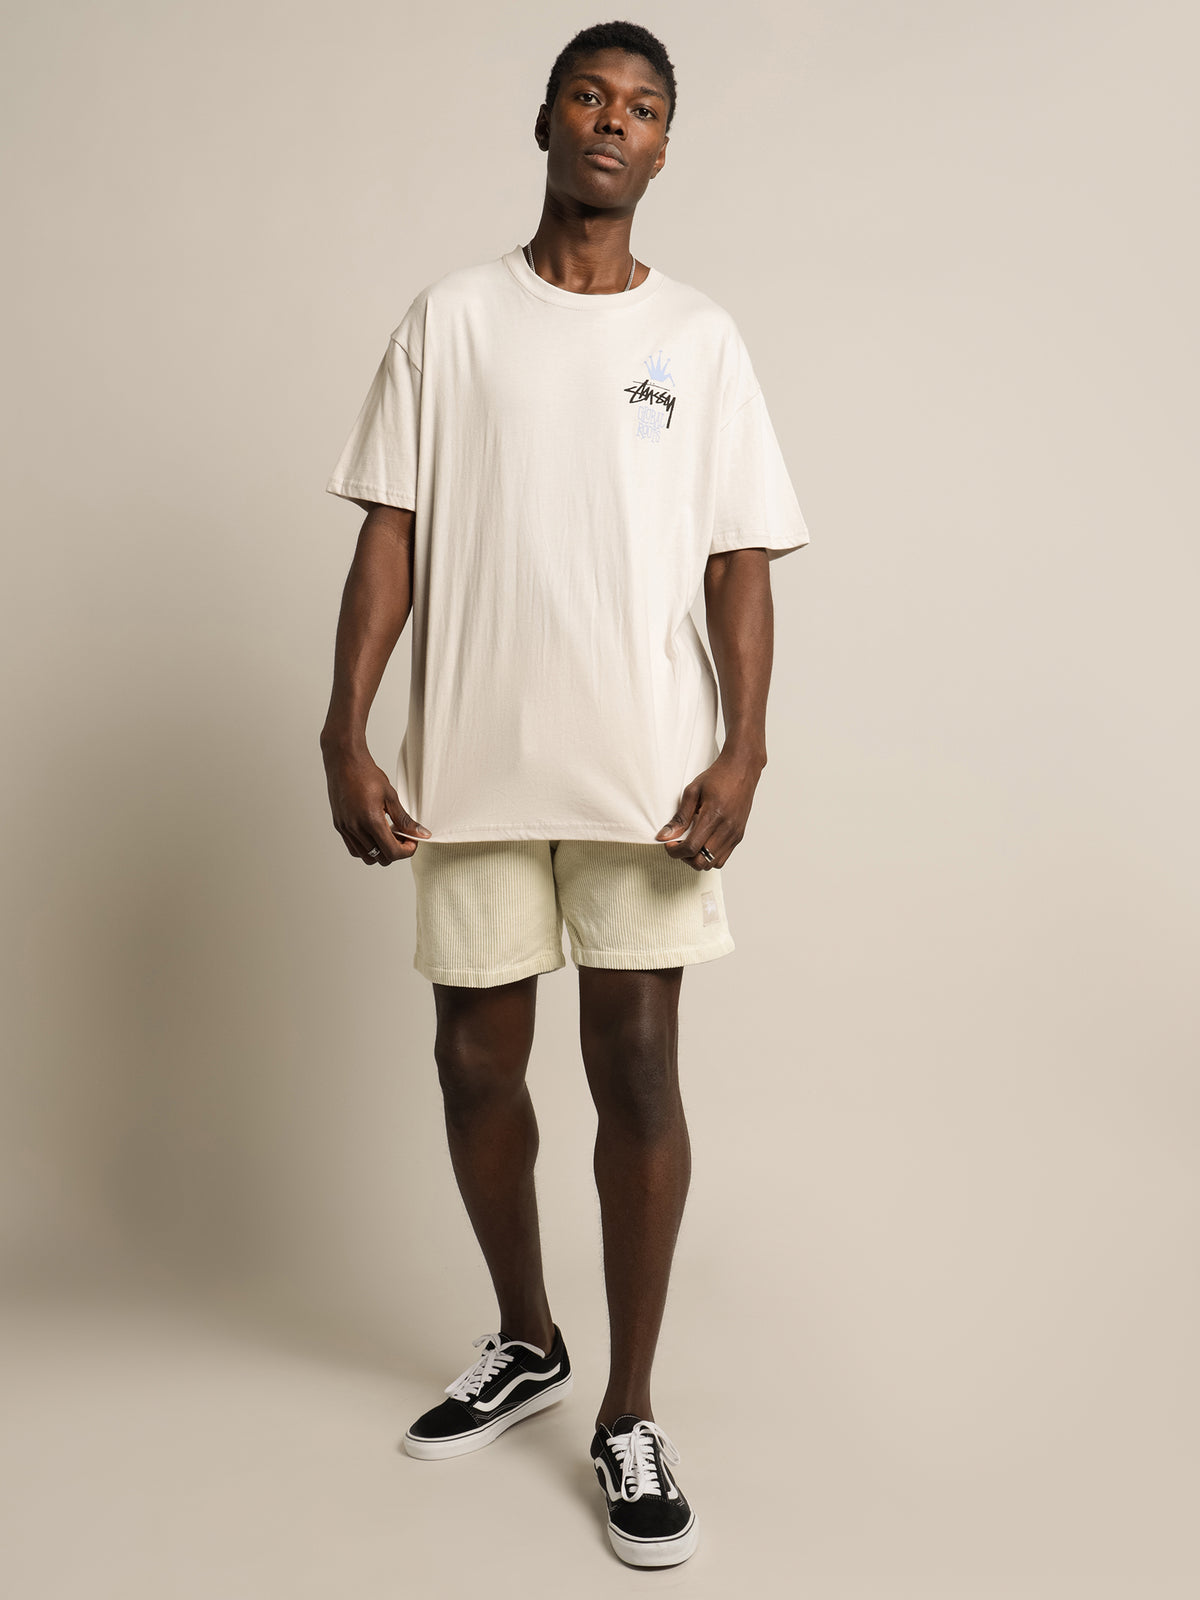 Global Roots 50/50 T-Shirt in White Sand